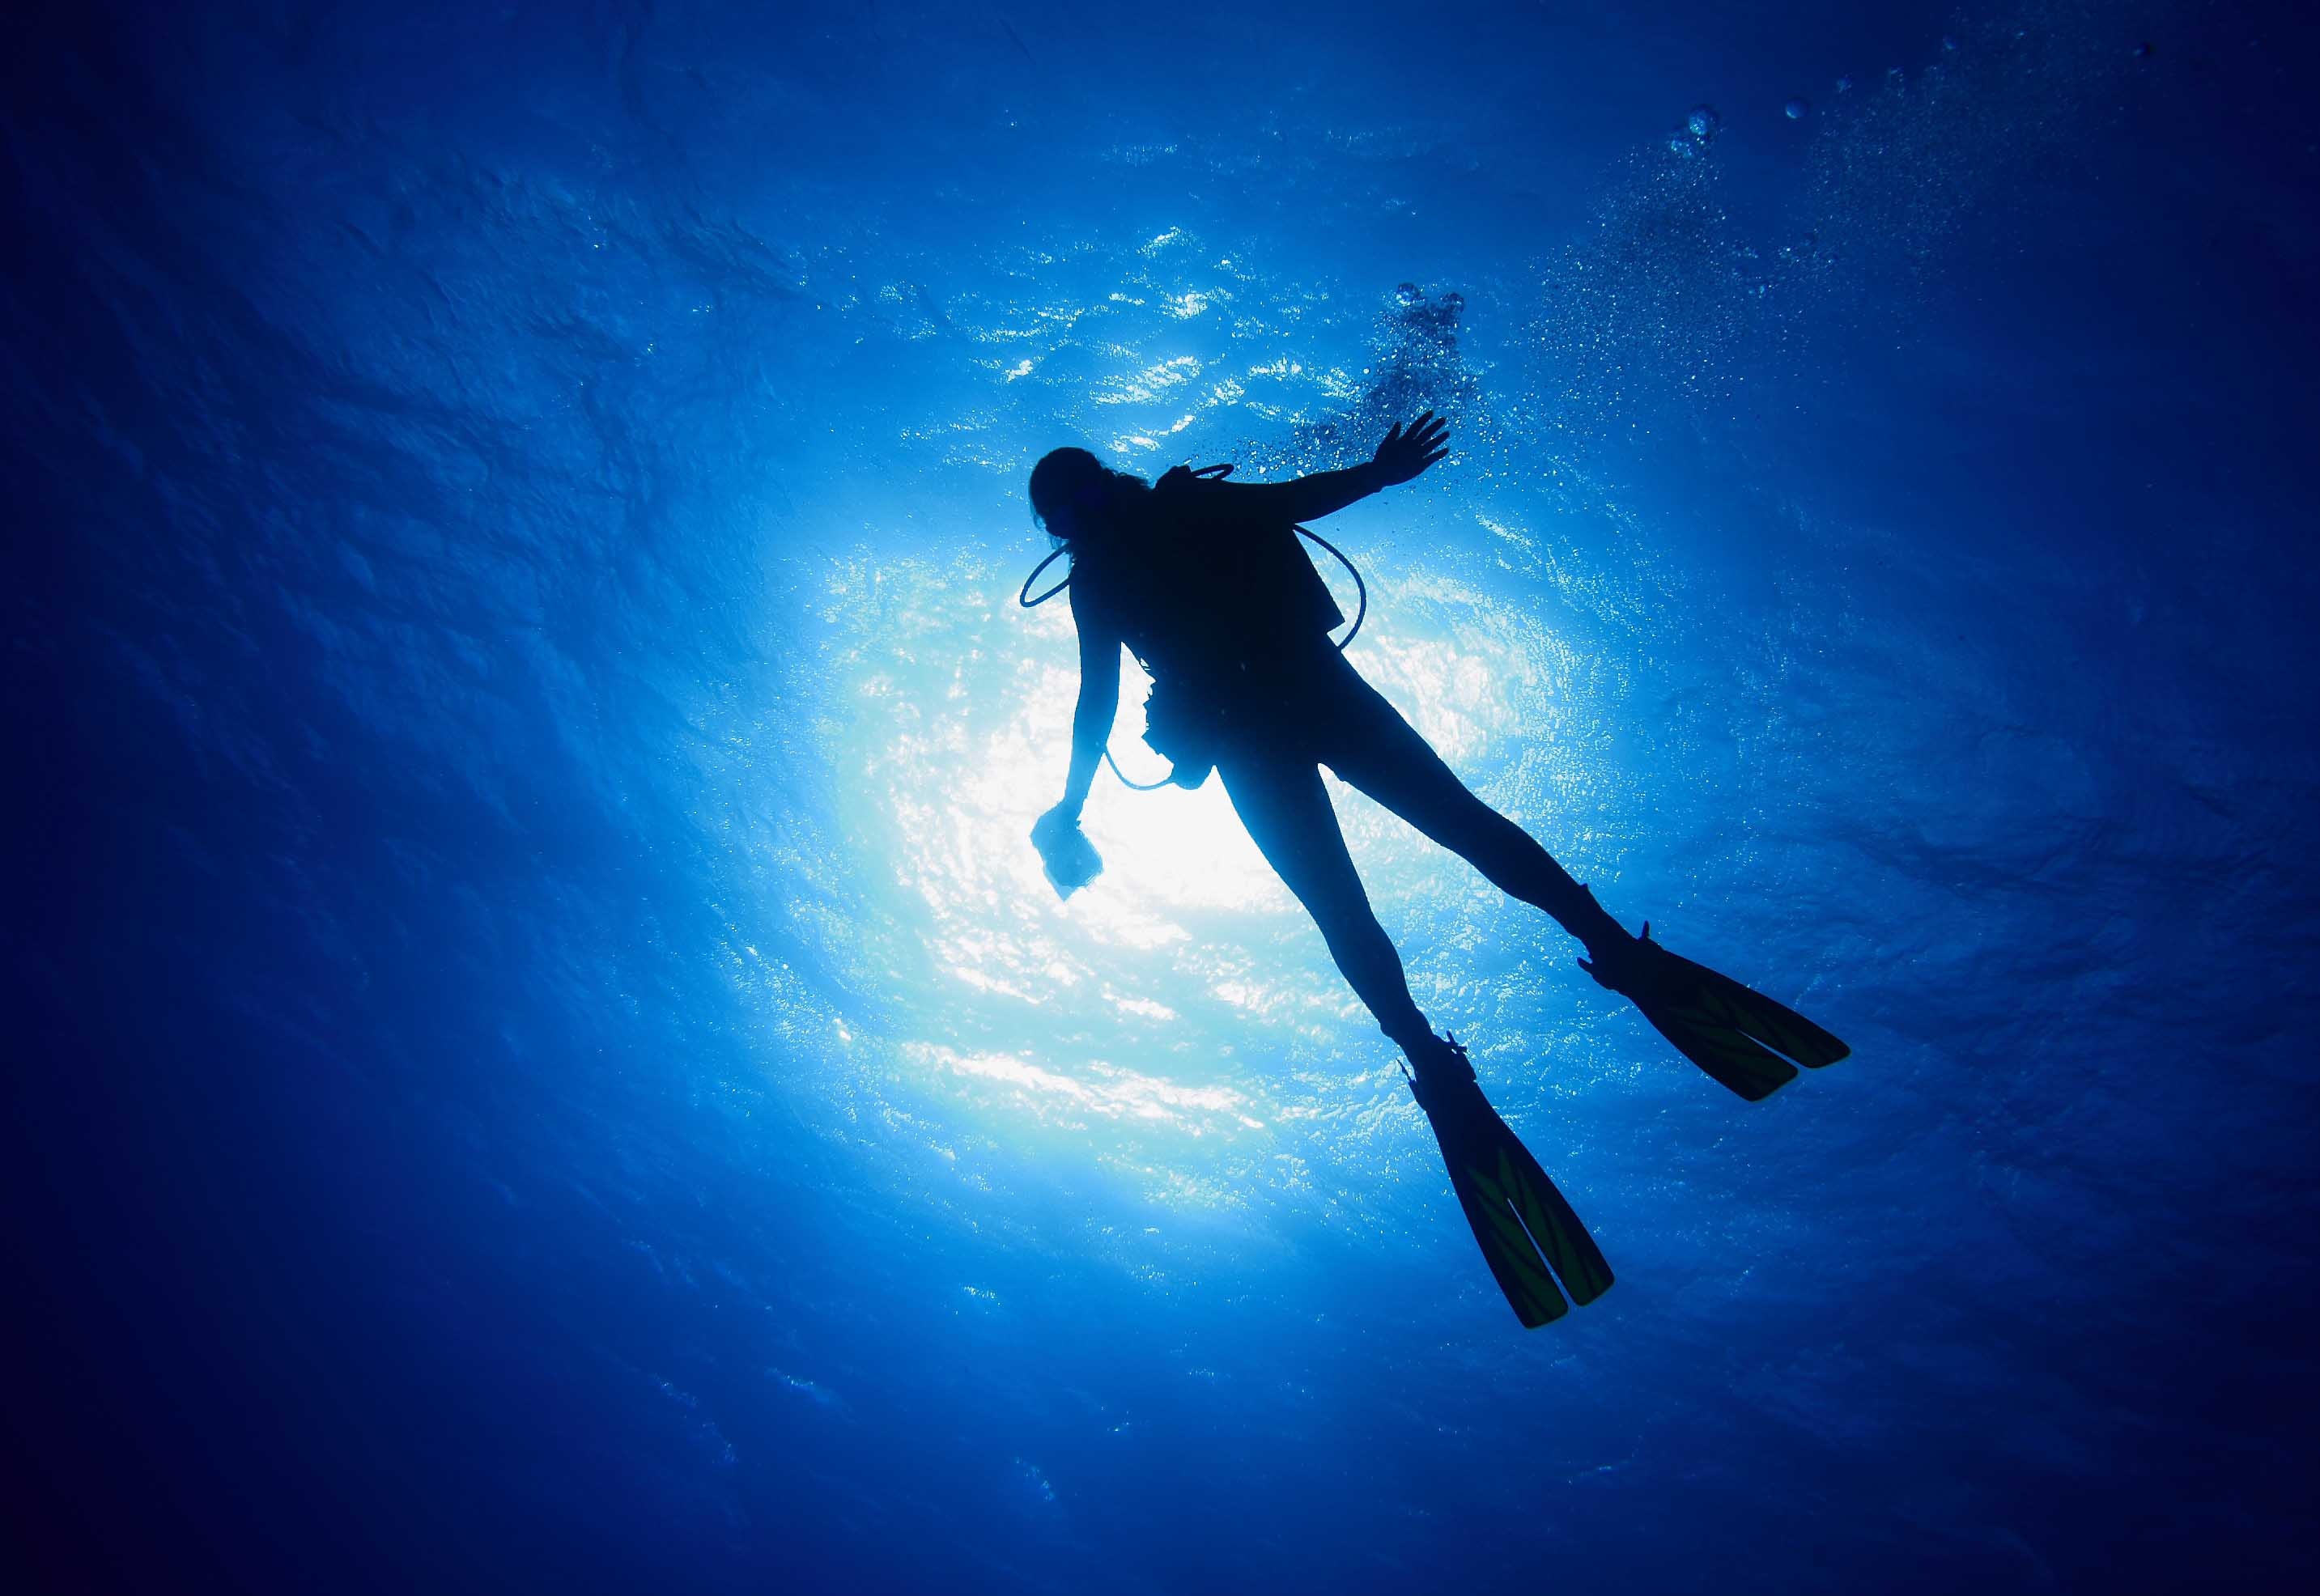 Diving: A diver equipped with a scuba set and flippers under the water surface. 2870x1980 HD Wallpaper.